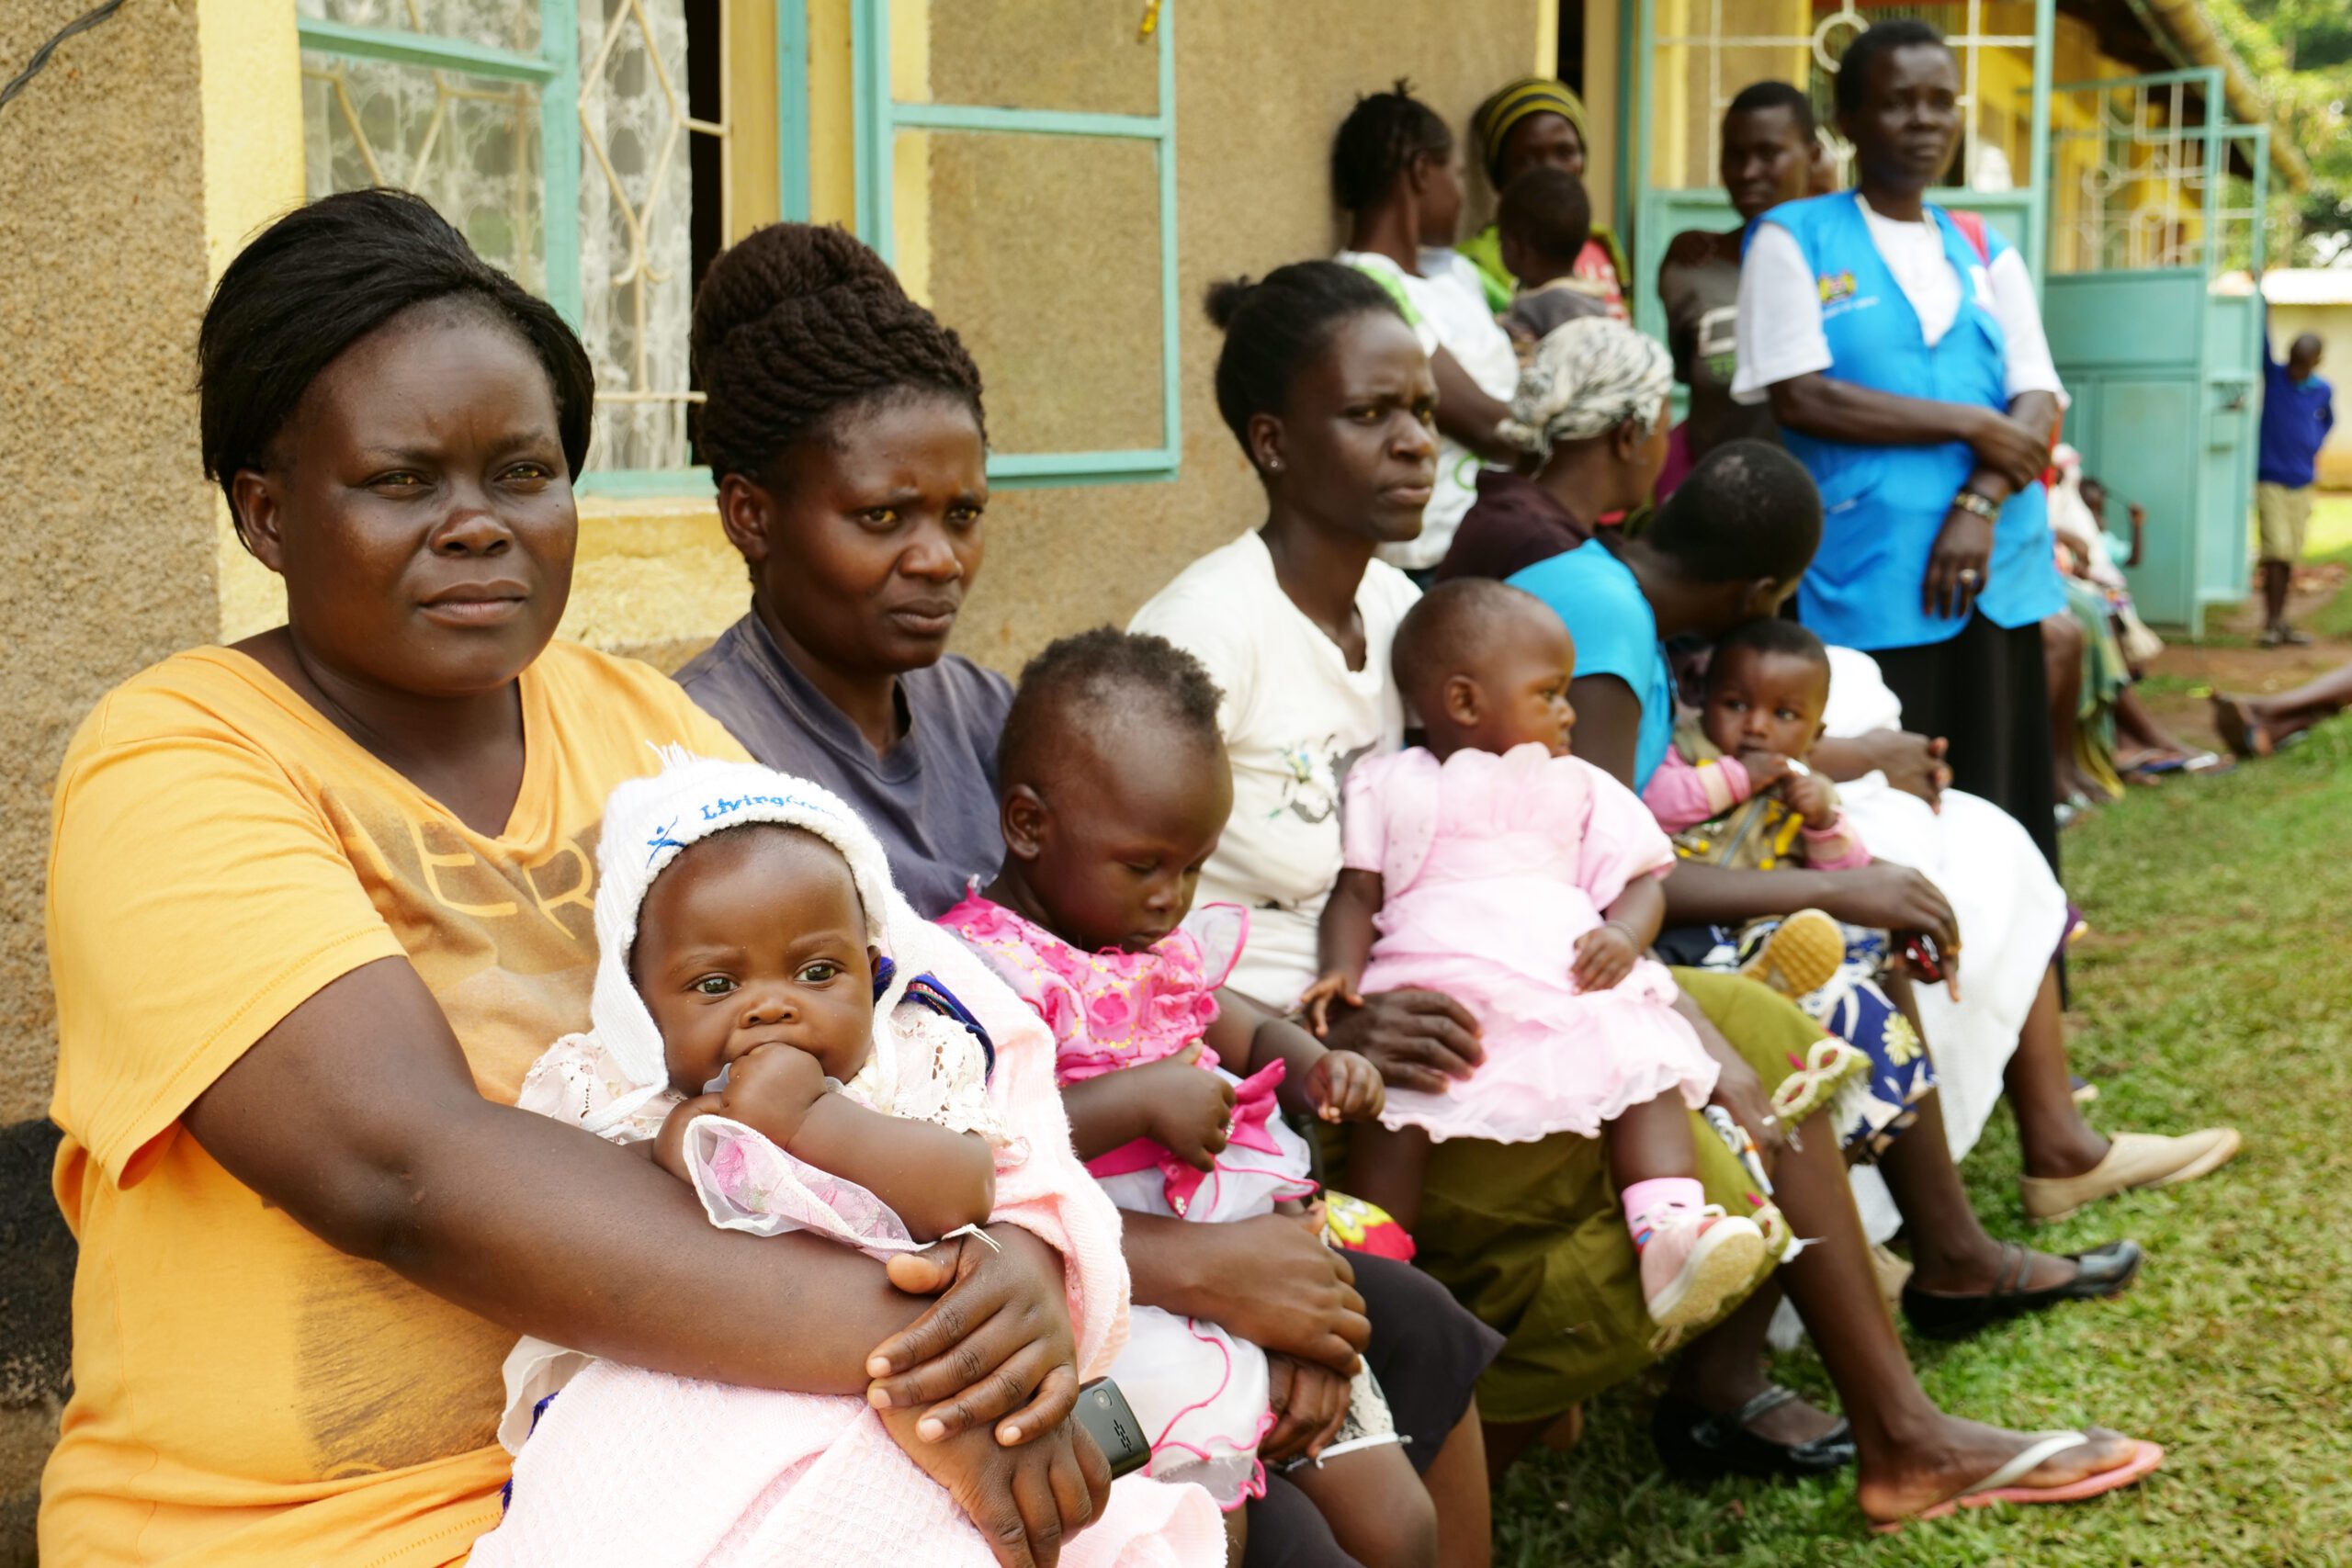 Women sit with their infants outside the Vikunga clinic, listening to speeches with potentially lifesaving messages during Maternity Open Day.